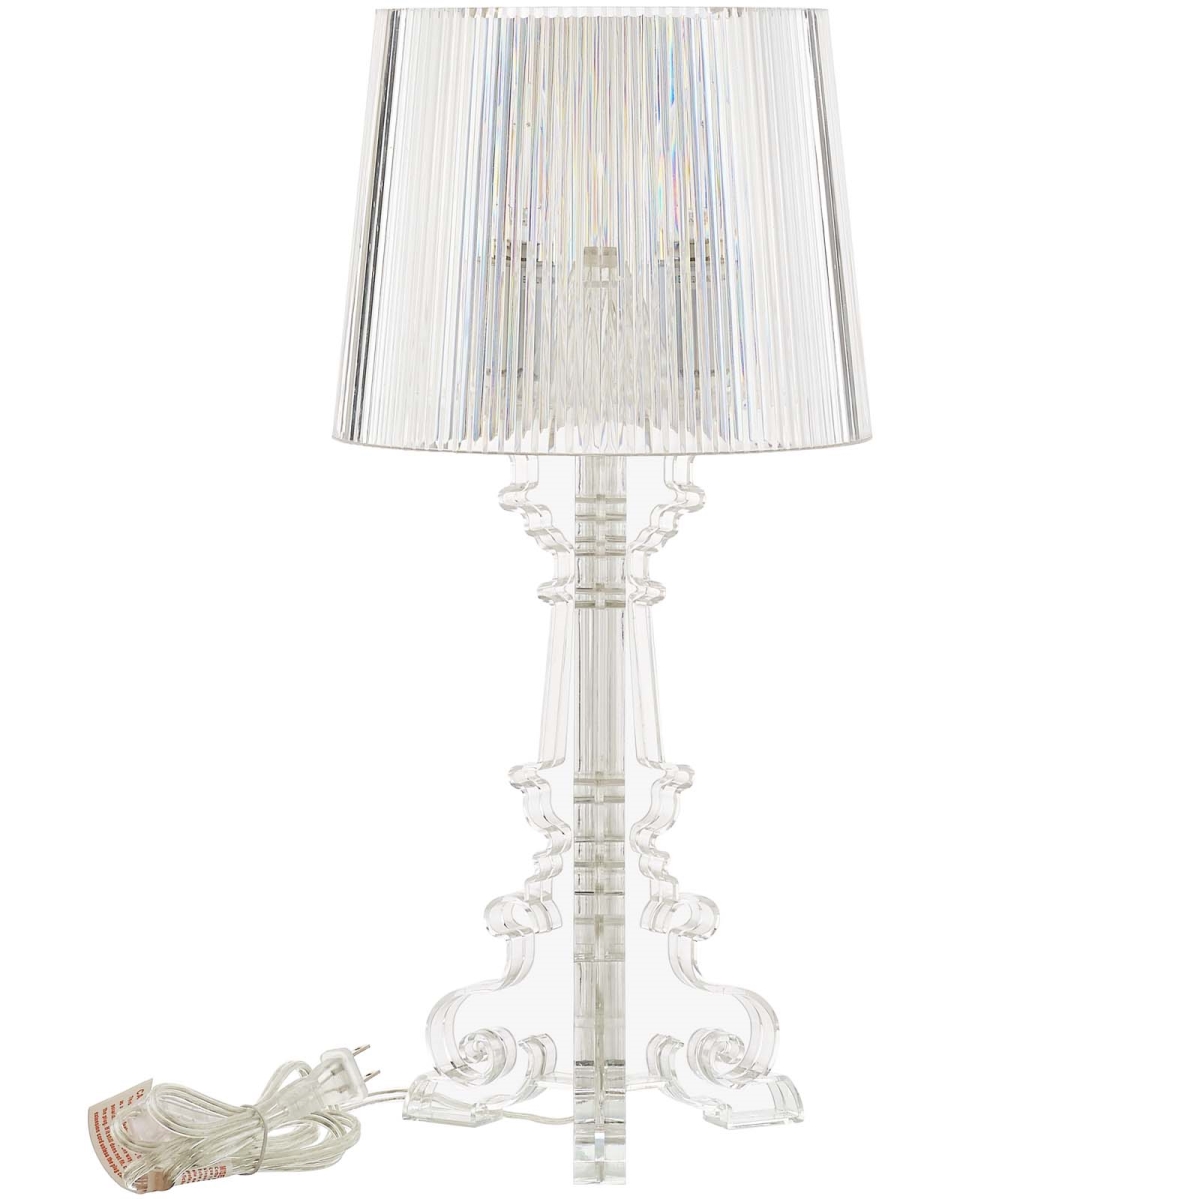 Eei-2896-clr 15.5 X 31.5 X 31.5 In. French Petite Acrylic Acrylic Table Lamp - Clear